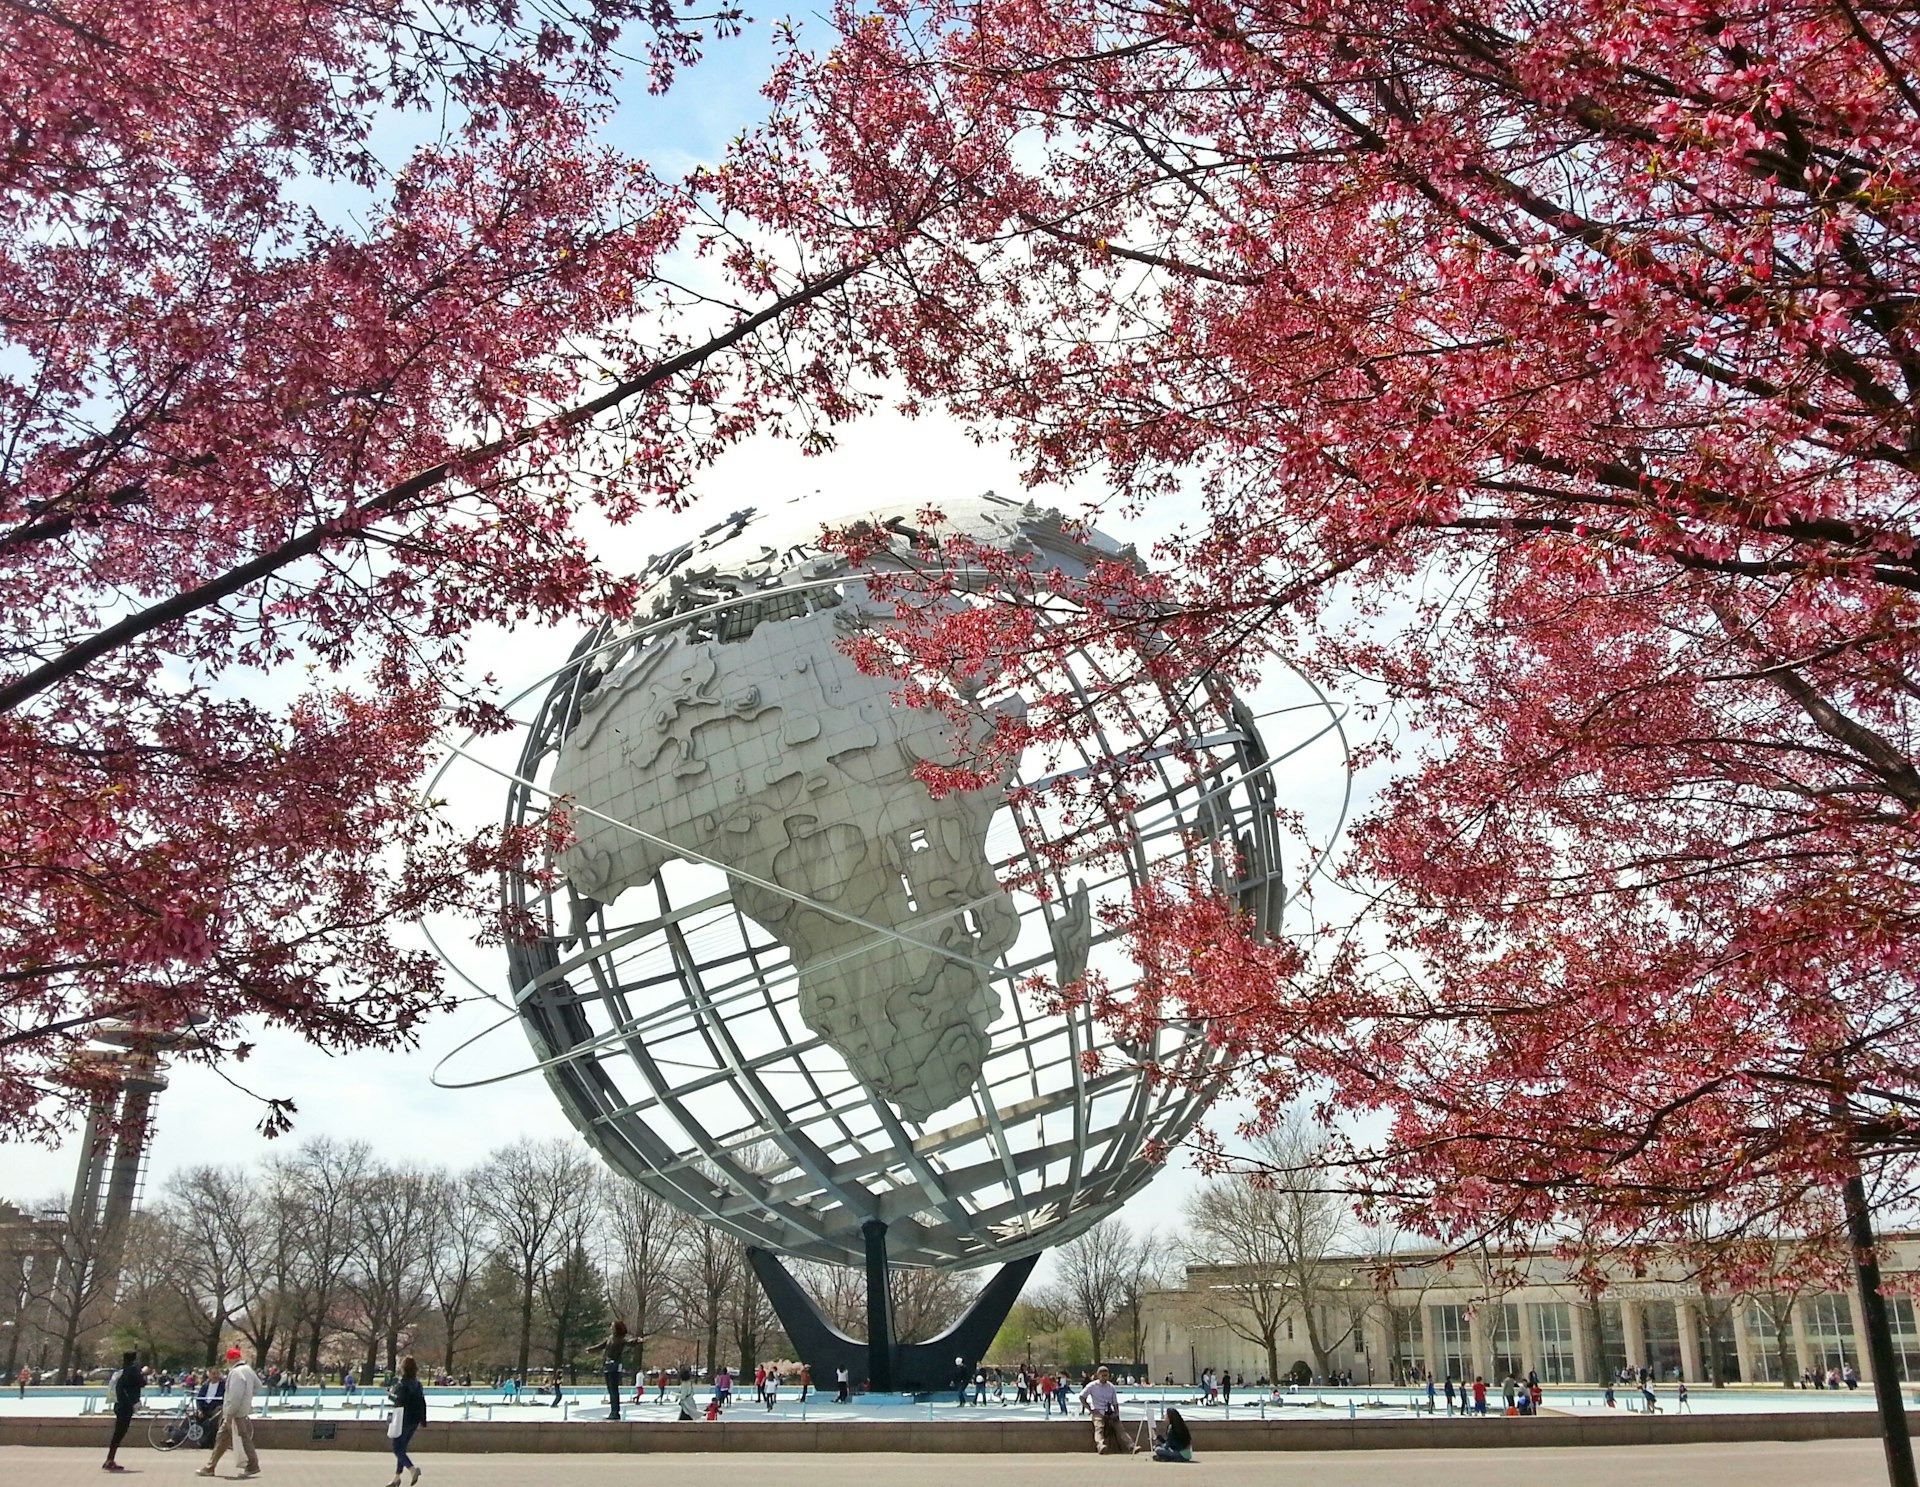 A large globe-like sculpture in the center of parkland surrounded by trees in blossom